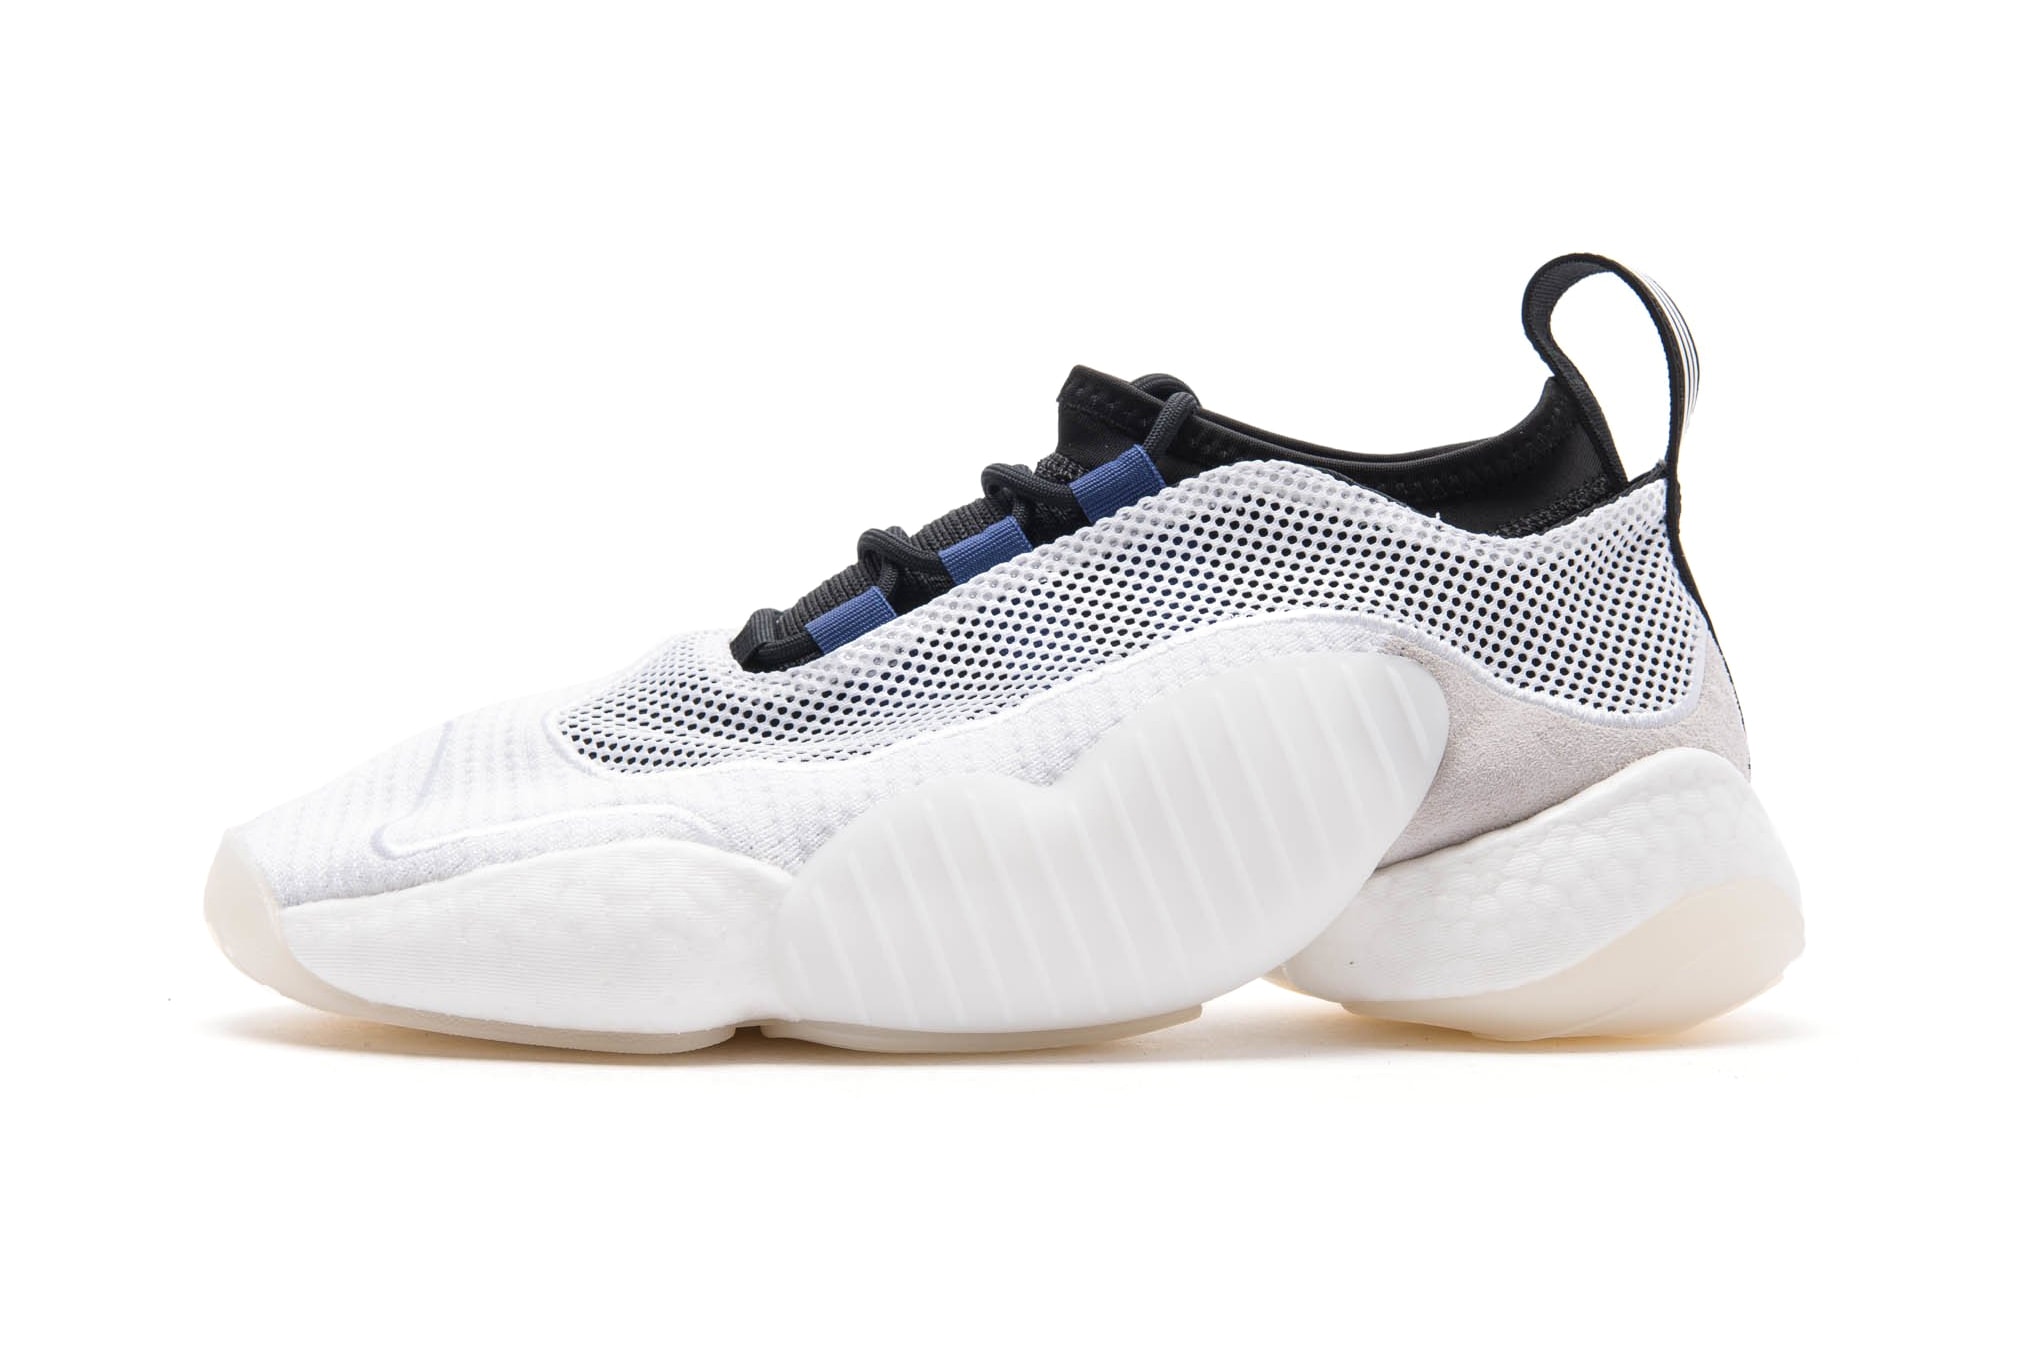 adidas Unveils Crazy BYW LVL 2 in White/Black